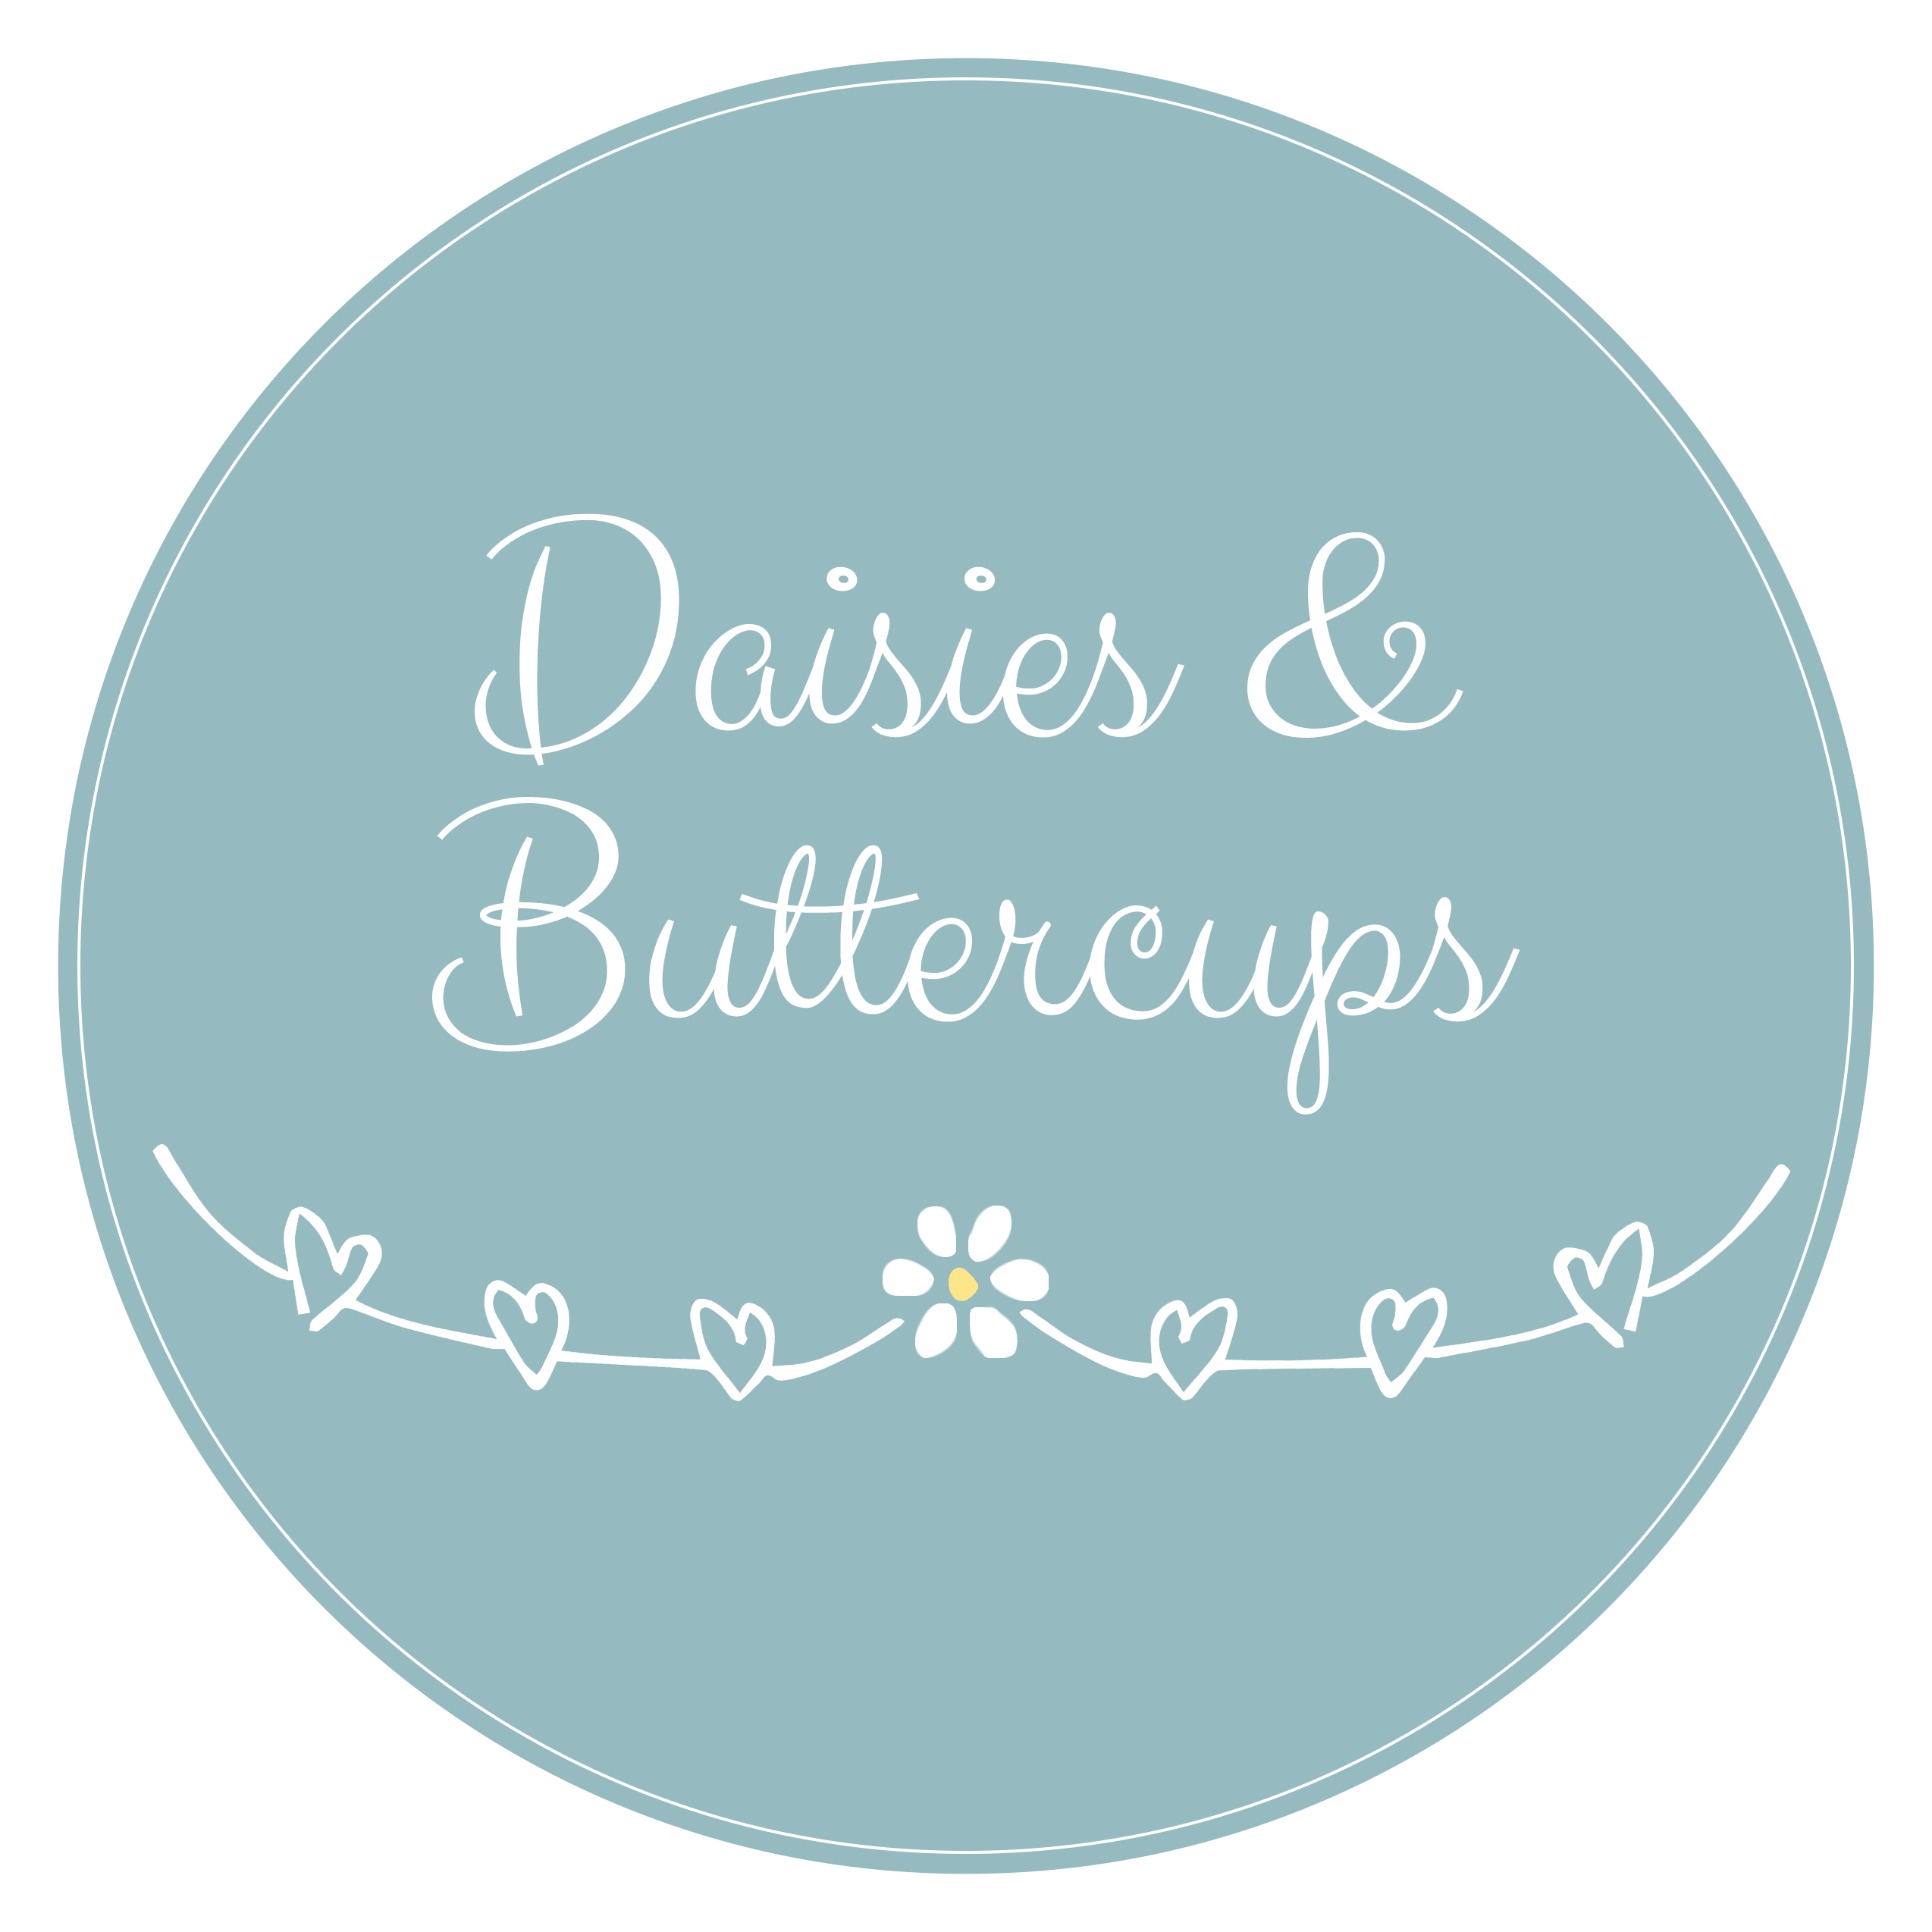 Daisies & Buttercups Photography